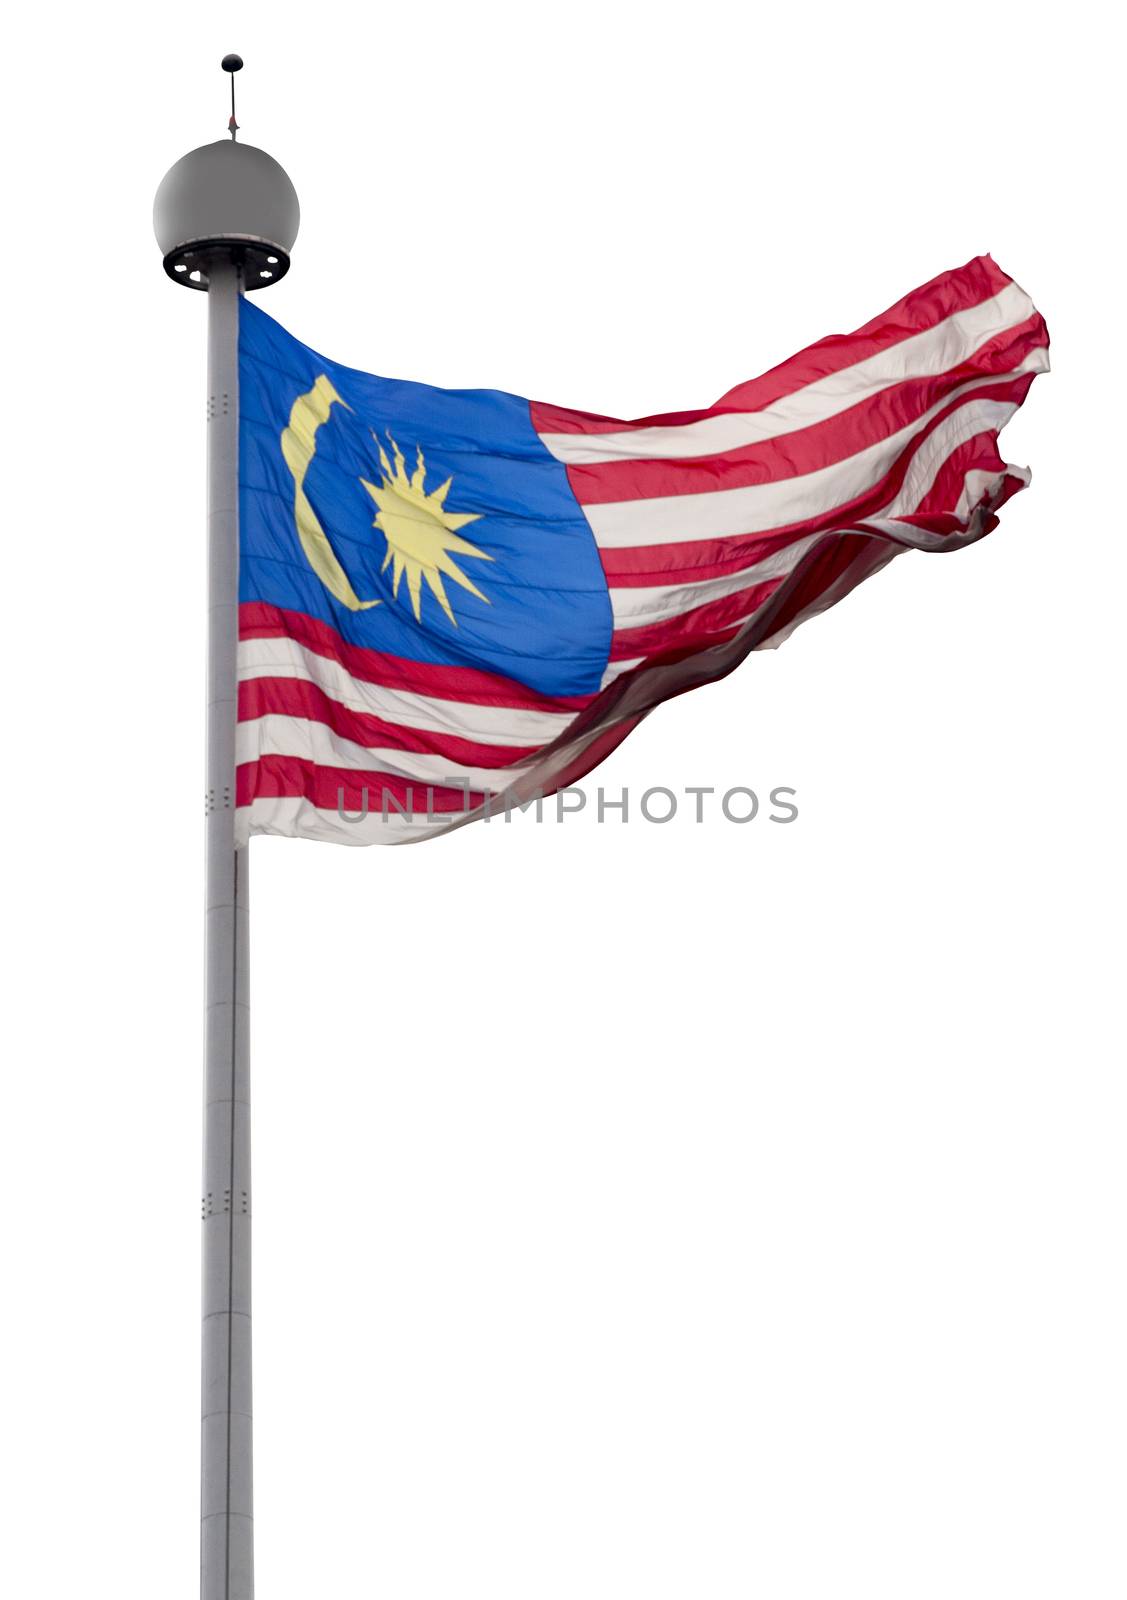 National flag of Malaysia by ints